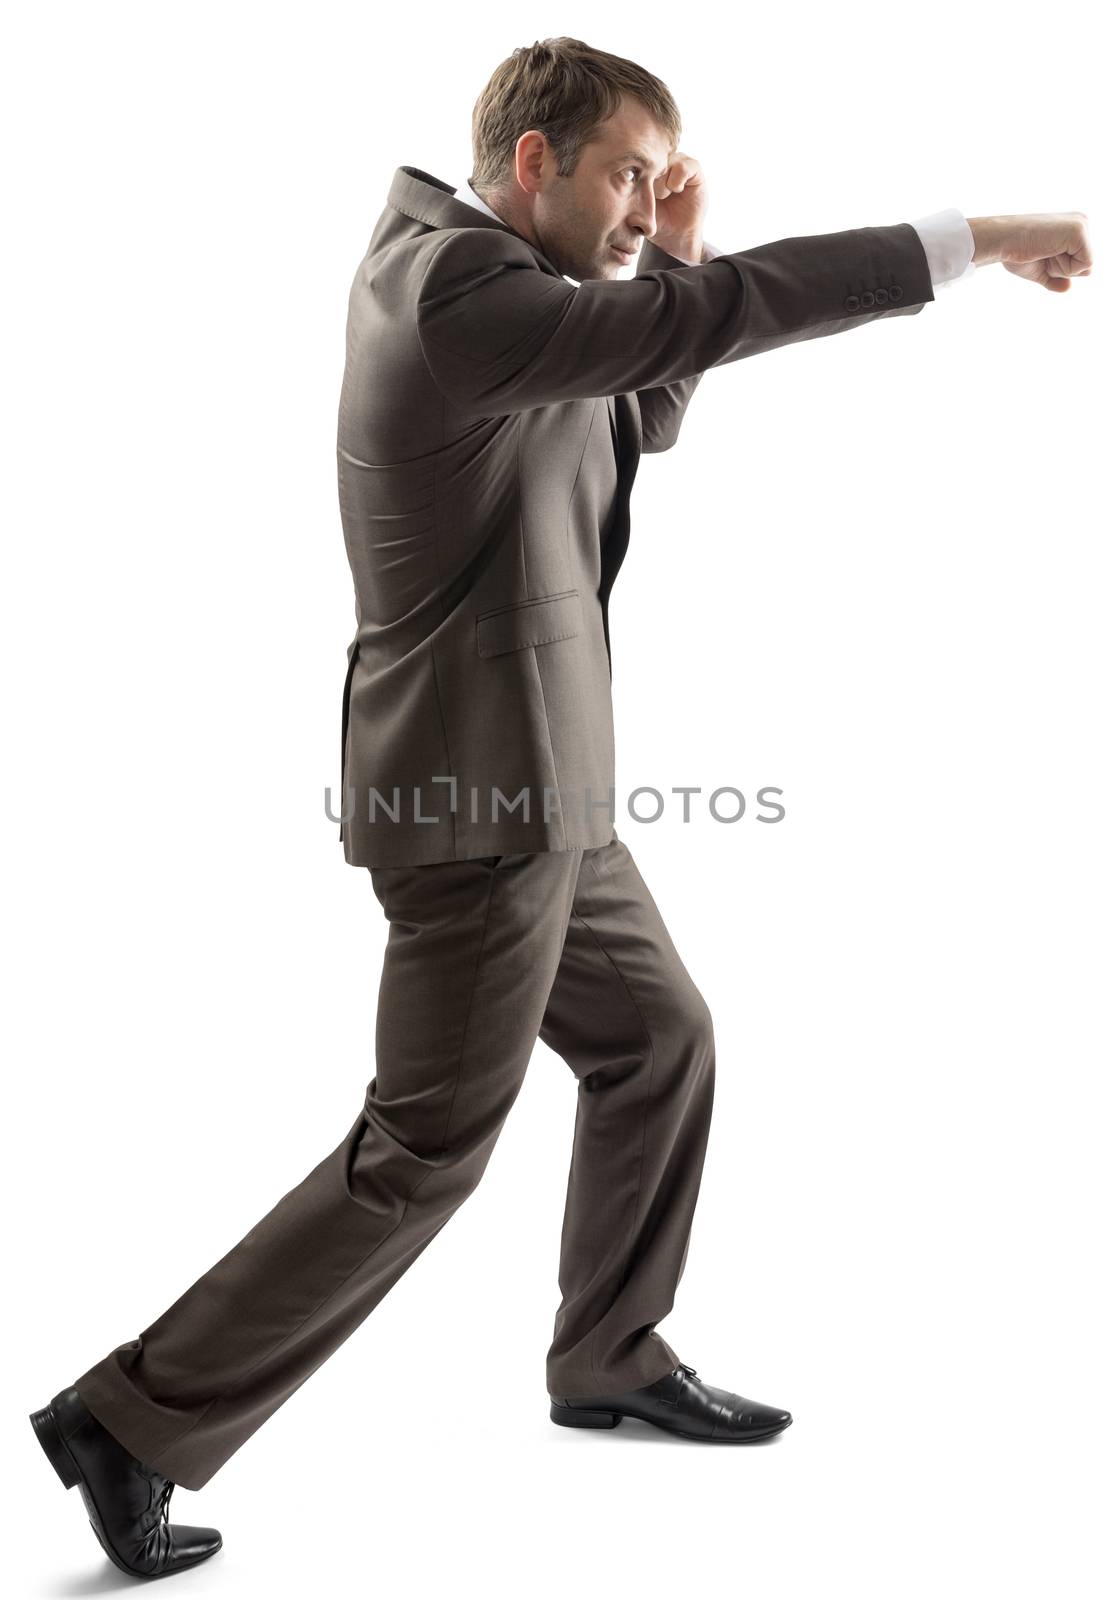 A man in suit punching and standing on white background